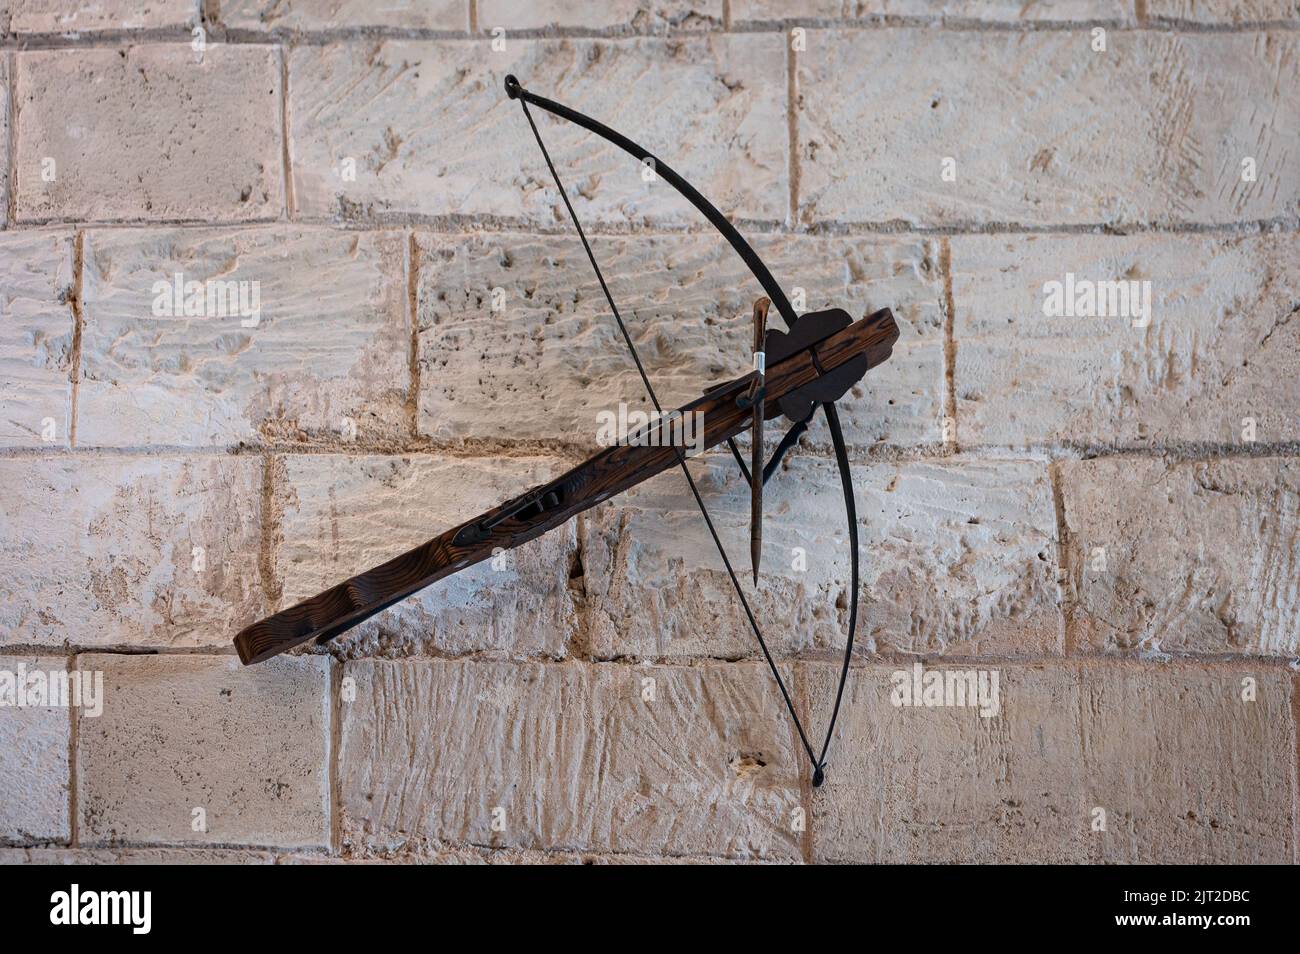 A closeup shot of an ancient crossbow weapon hanging on the stone wall of the castle Stock Photo